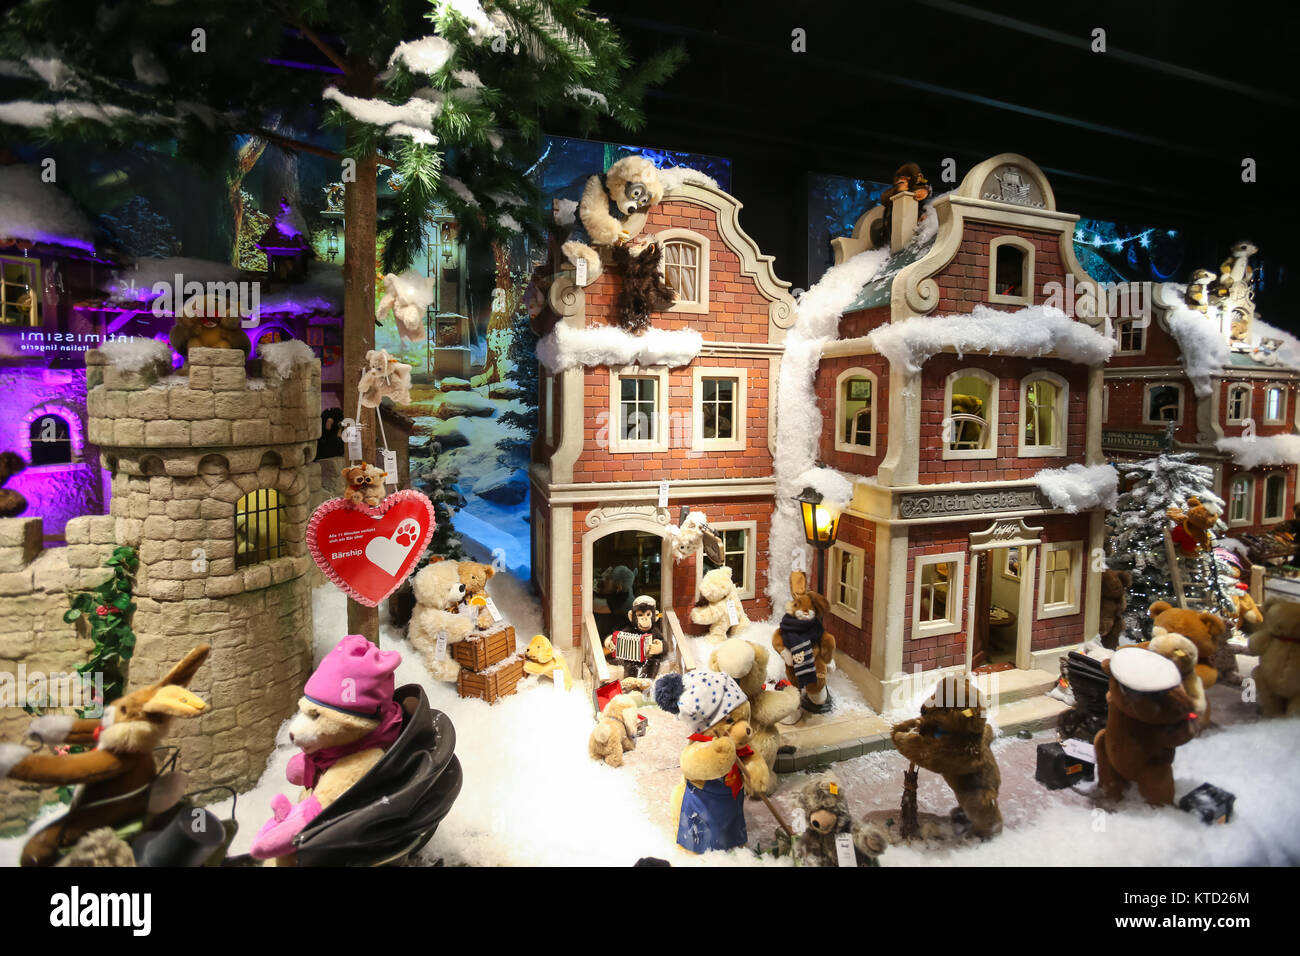 MUNICH, GERMANY - DECEMBER 11, 2017 : The shop window of Galeria Kaufhof ornated with toys in winter style at night in Munich, Germany. Stock Photo